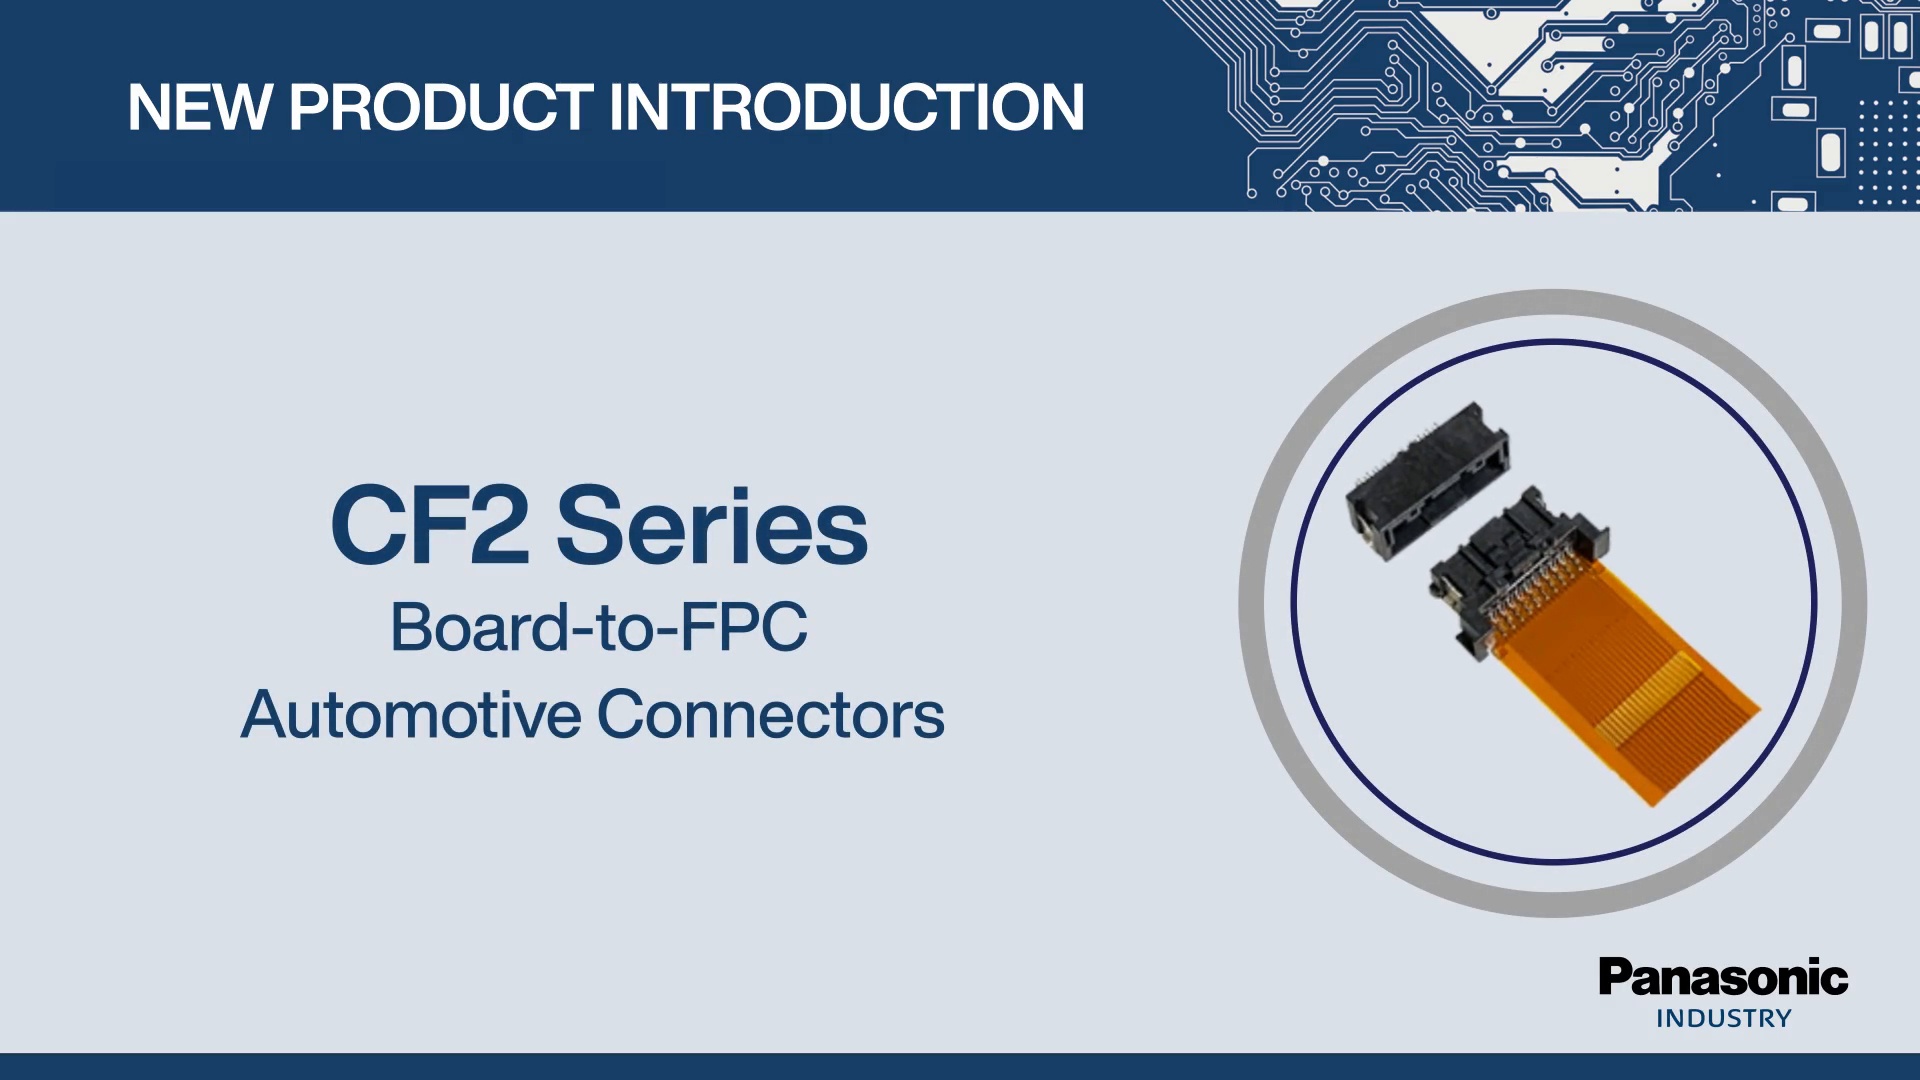 New Product Introduction: CF2 Series Board-to-FPC Automotive Connectors